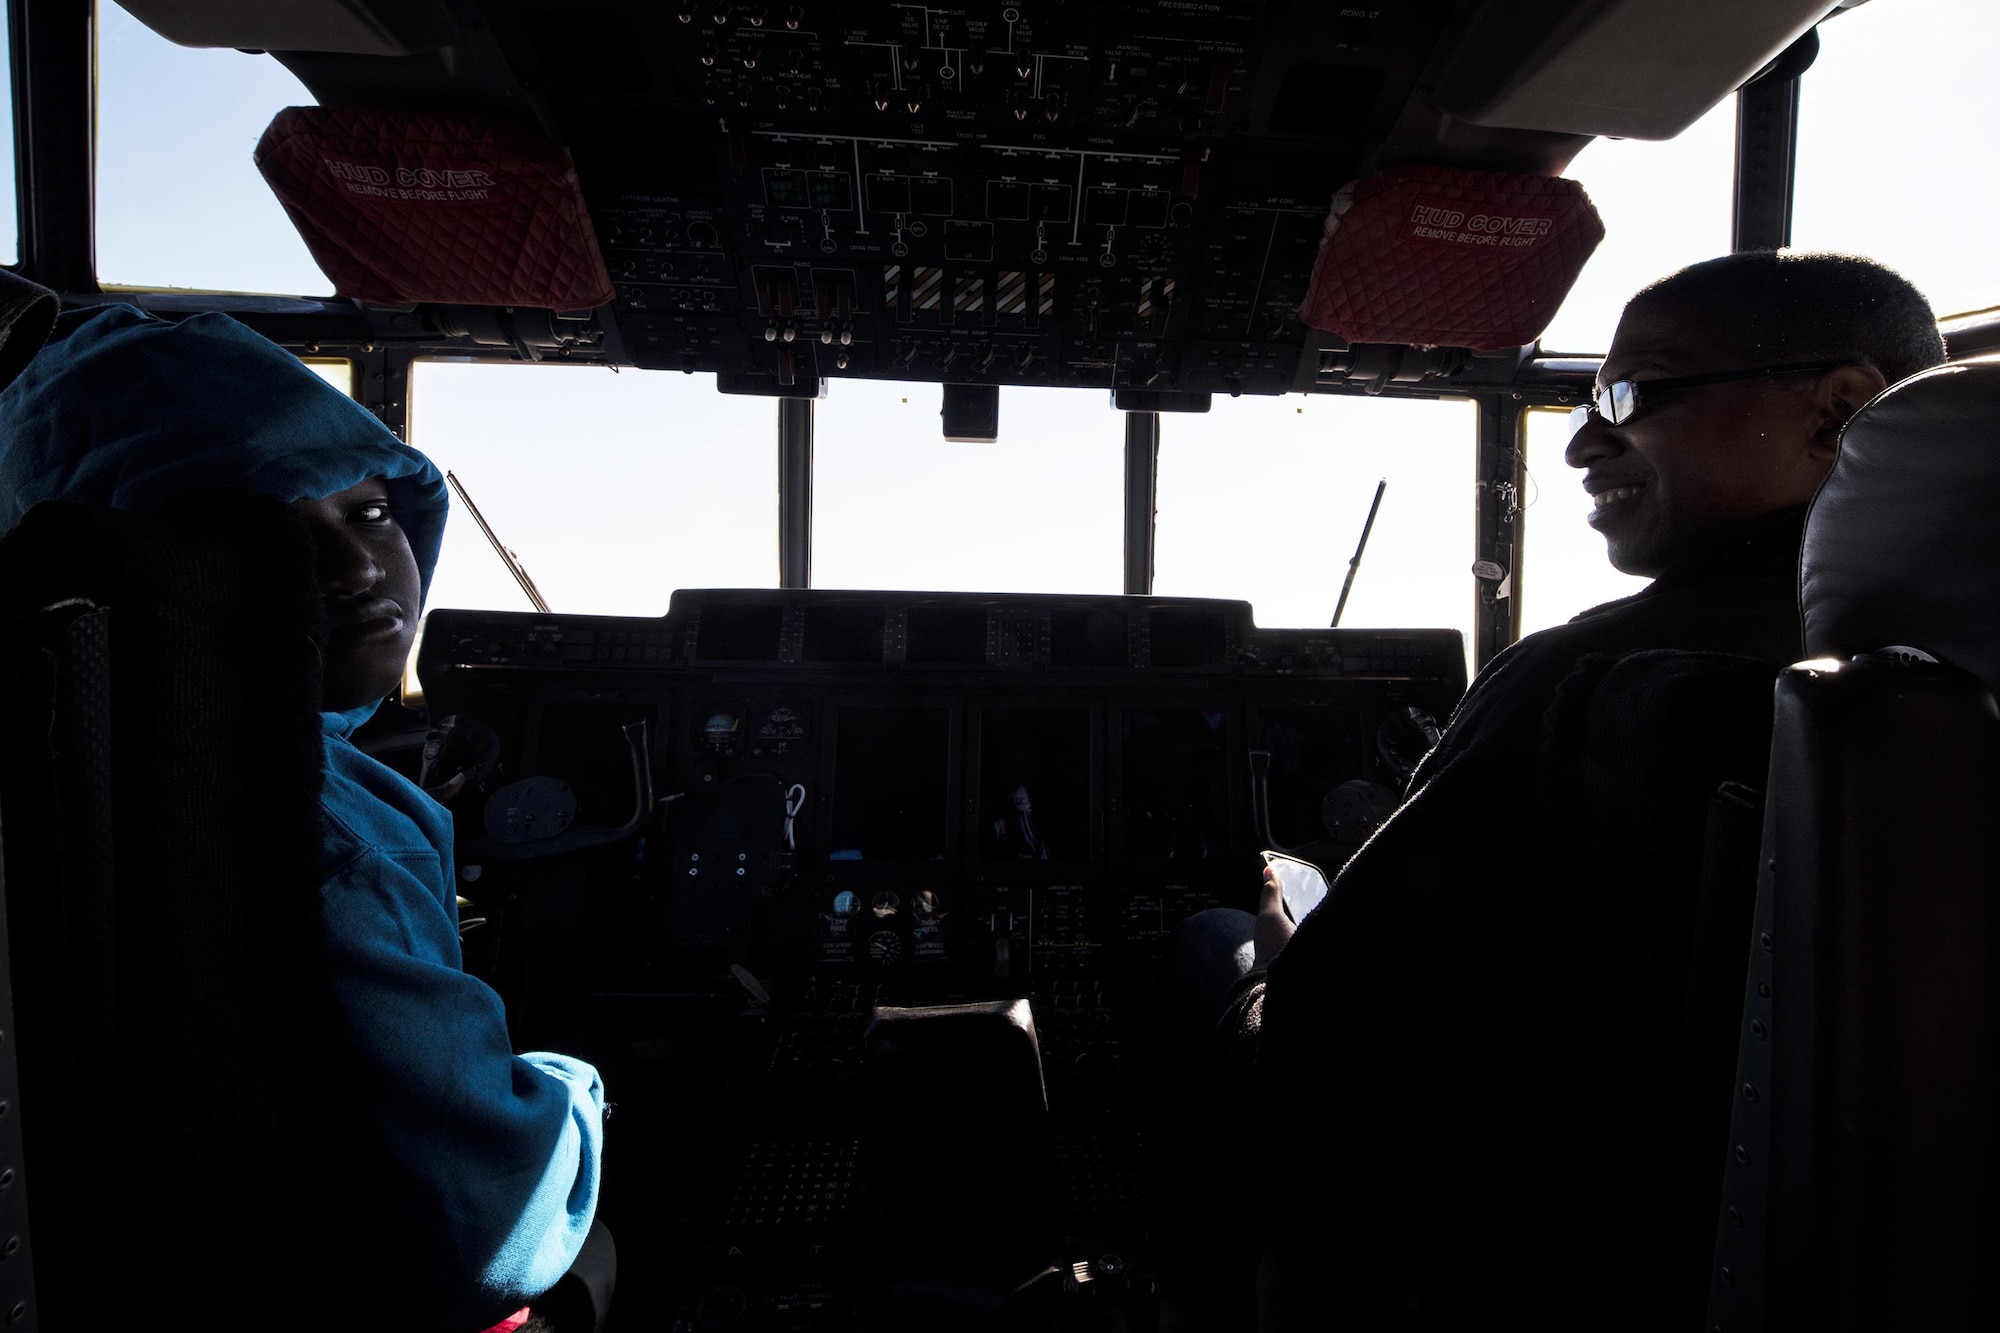 Paul Collier, local community member, and his son, Xavion, sit in the cockpit of a HC-130J Combat King during the Thunder Over South Georgia Air Show, Oct. 29,2017 at Moody Air Force Base, Ga. Moody opened its gates to the public for a free, two-day event as a way to thank the local community for their ongoing support of the base’s mission (U.S. Air Force photo by Airman Eugene Oliver)